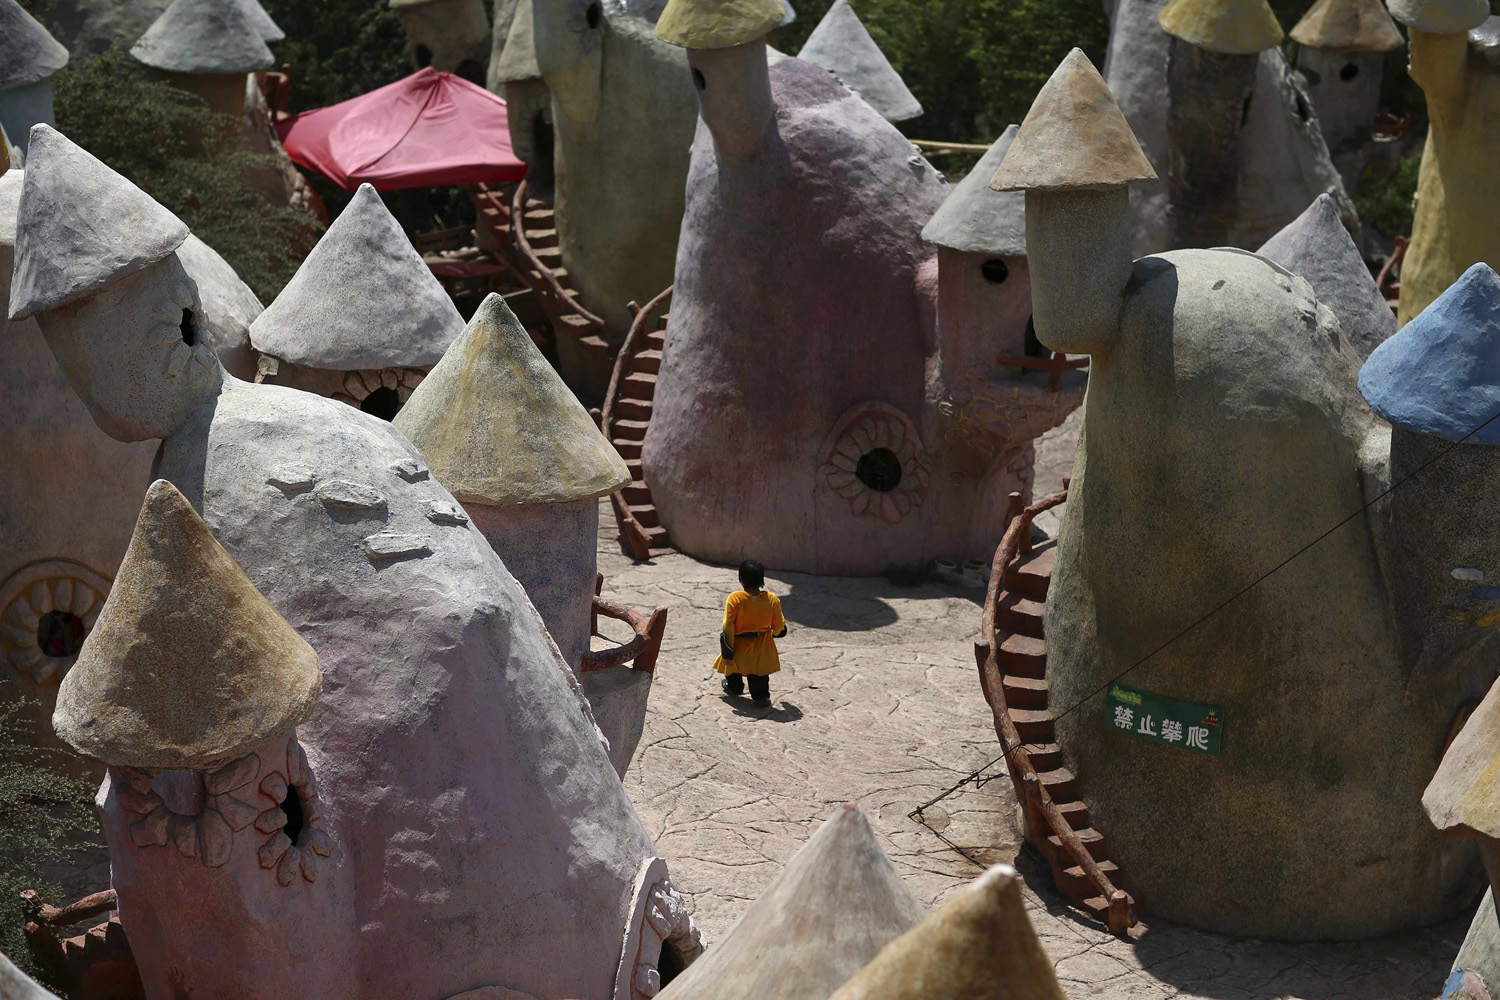 A dwarf walks in between mushroom-shaped houses after performances at Kunming World Butterflies Garden, Yunnan province on May 21, 2014.